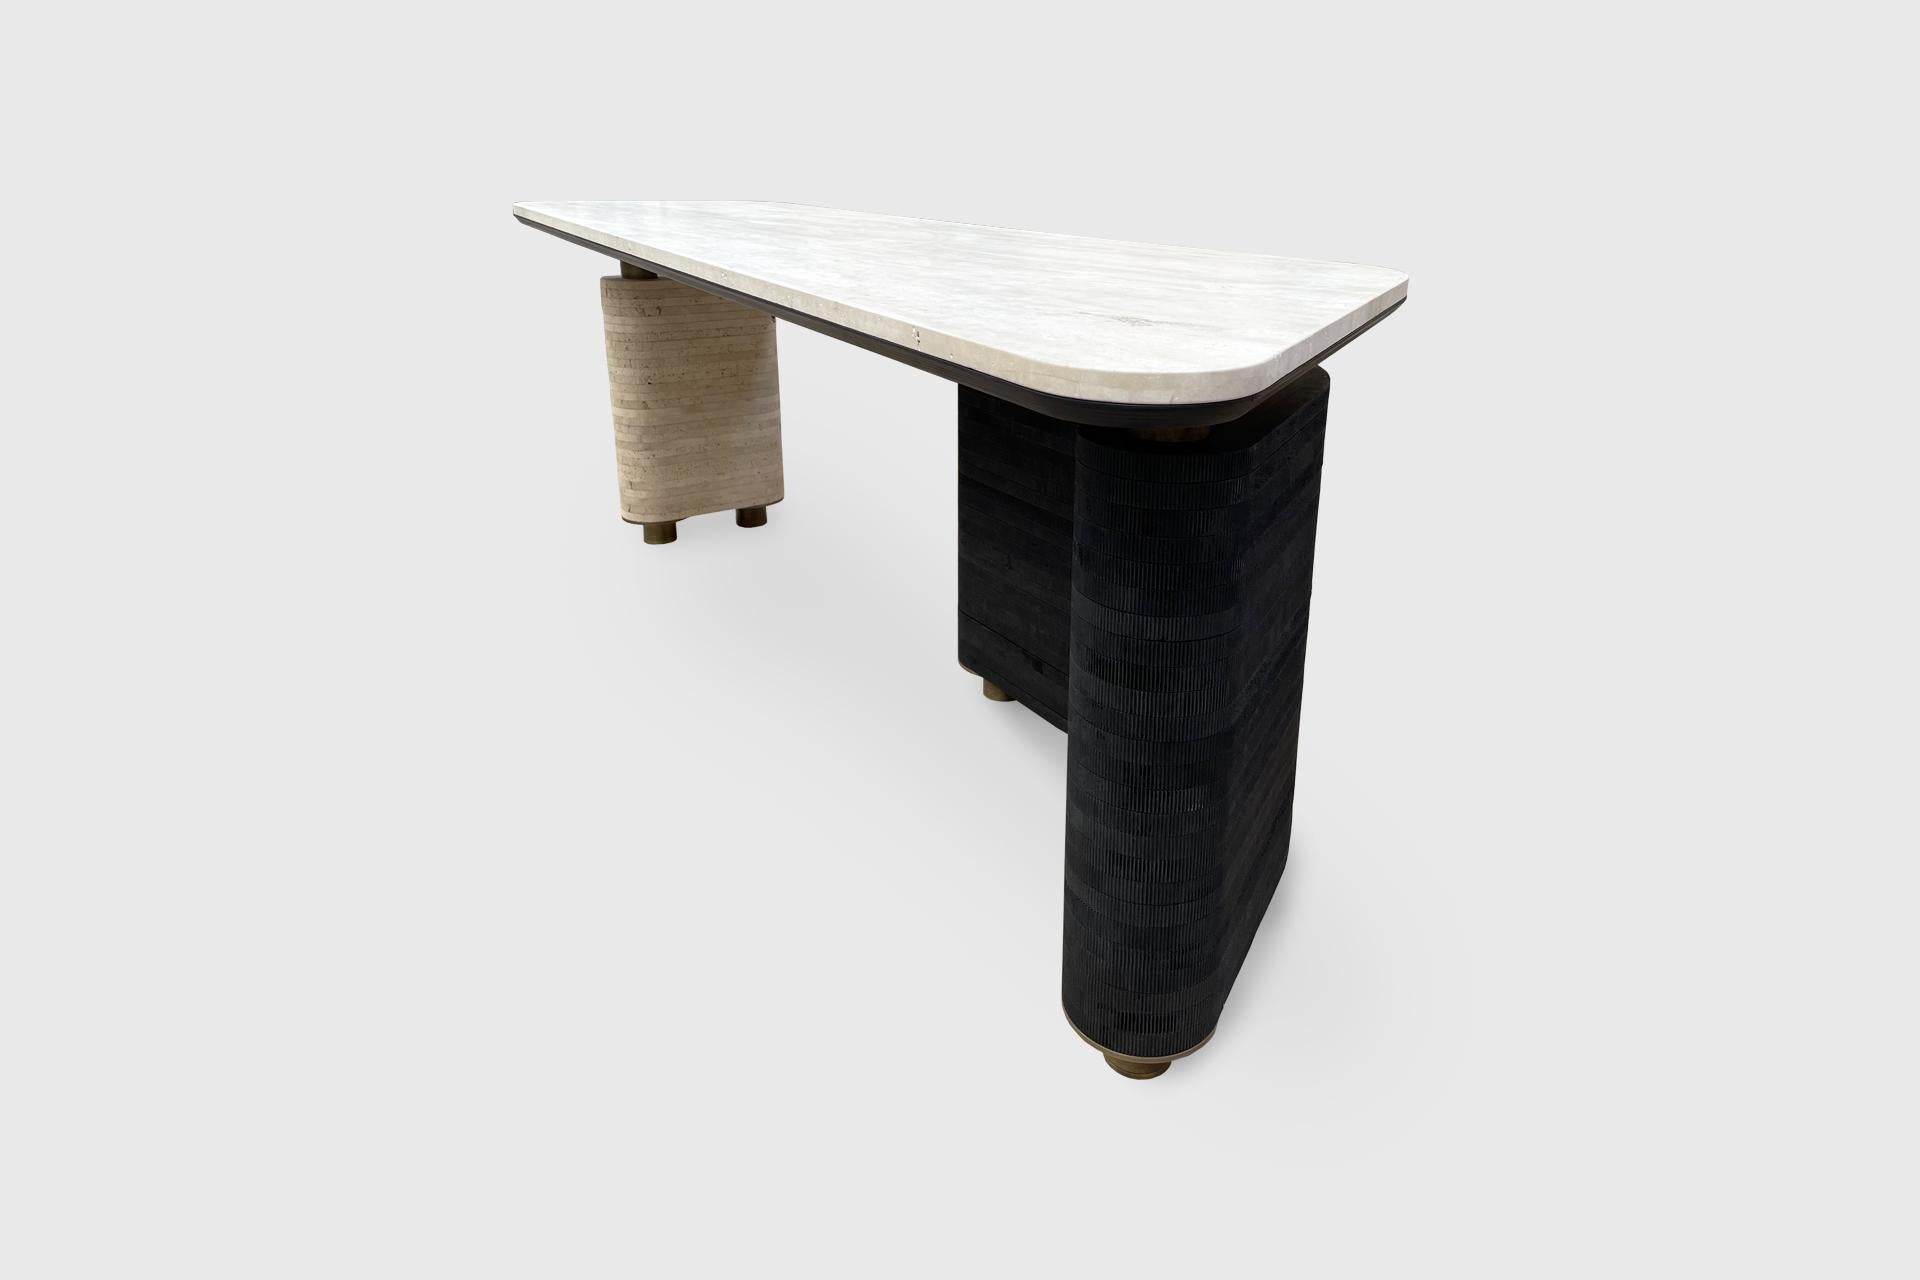 The S3 Desk in Stone top, Leg #1 Stacked Stone, Leg #2 Stacked Textured Wood and Brass Detail by Alexander Diaz Anderson

Dimensions: 
L 215.0cm/84.6”
W 75.0cm/29.5”
H 77.0cm/30.3”

Stone Options:
Verde Tikal
Negro Monterrey
Silver Travertine
Ocean